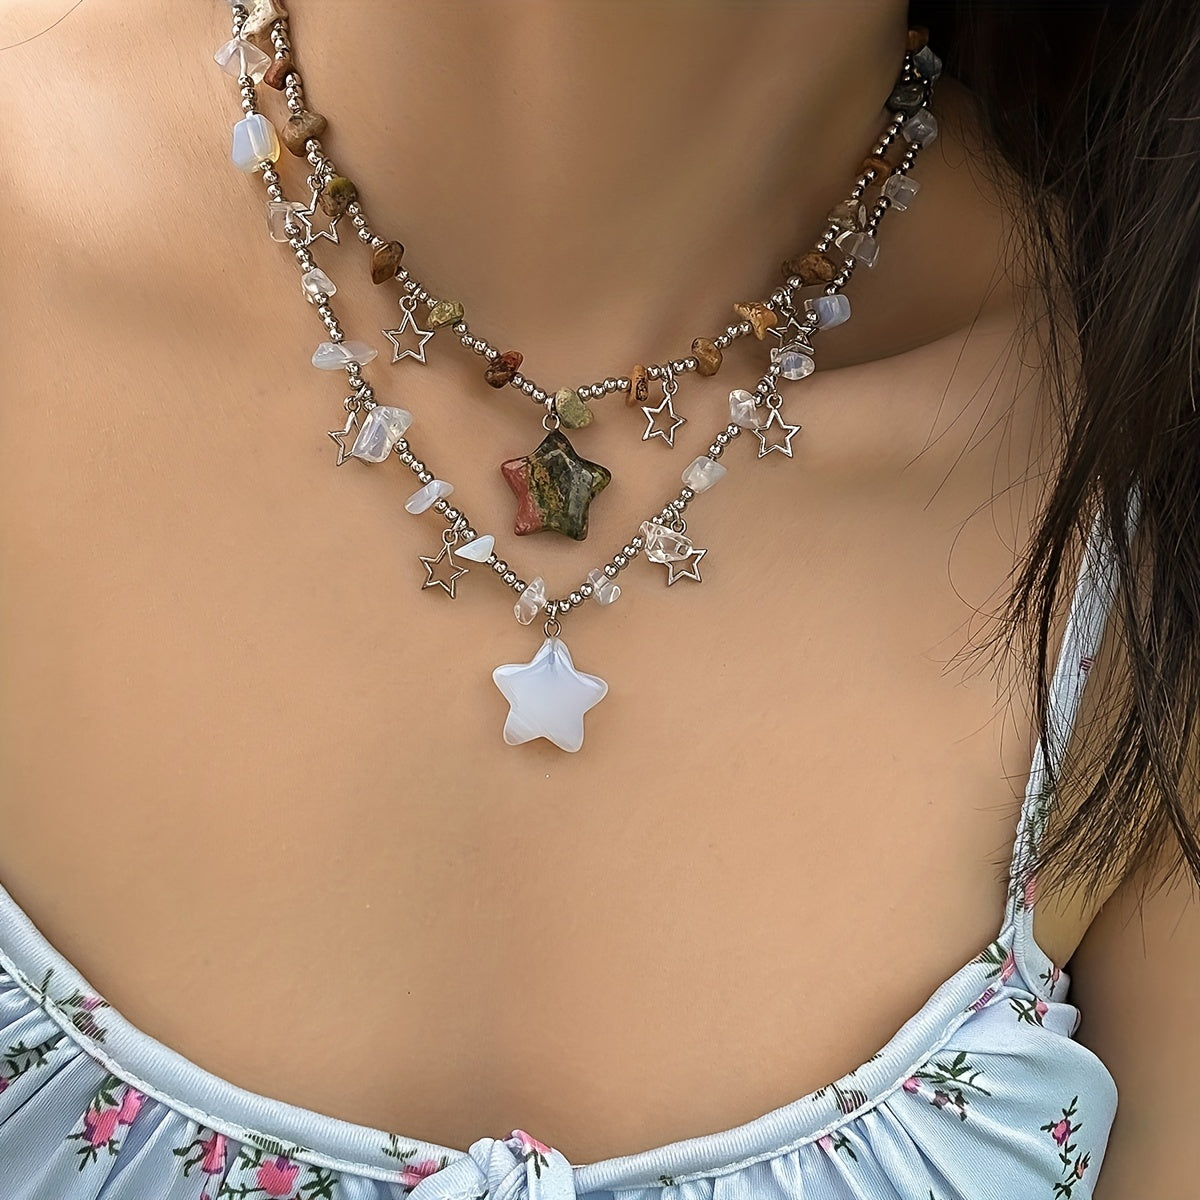 Colorful Irregular Stone Vintage Turquoise Beads Star Pendant Clavicle Necklace For Girls Gift